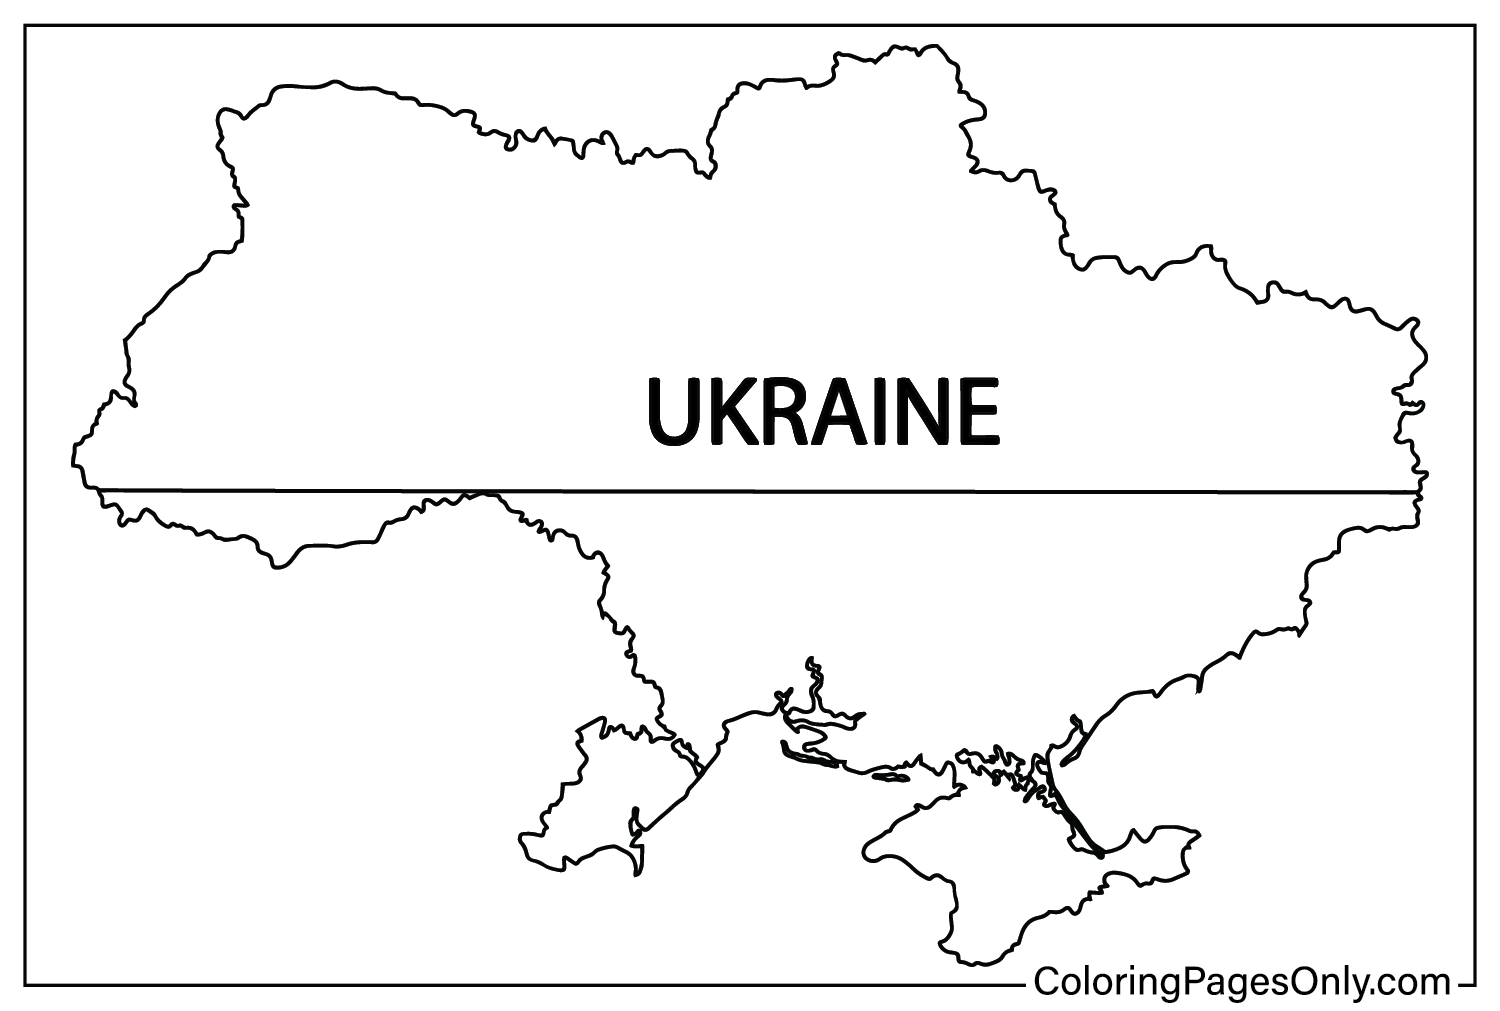 Ukraine Map Coloring Page from Ukraine